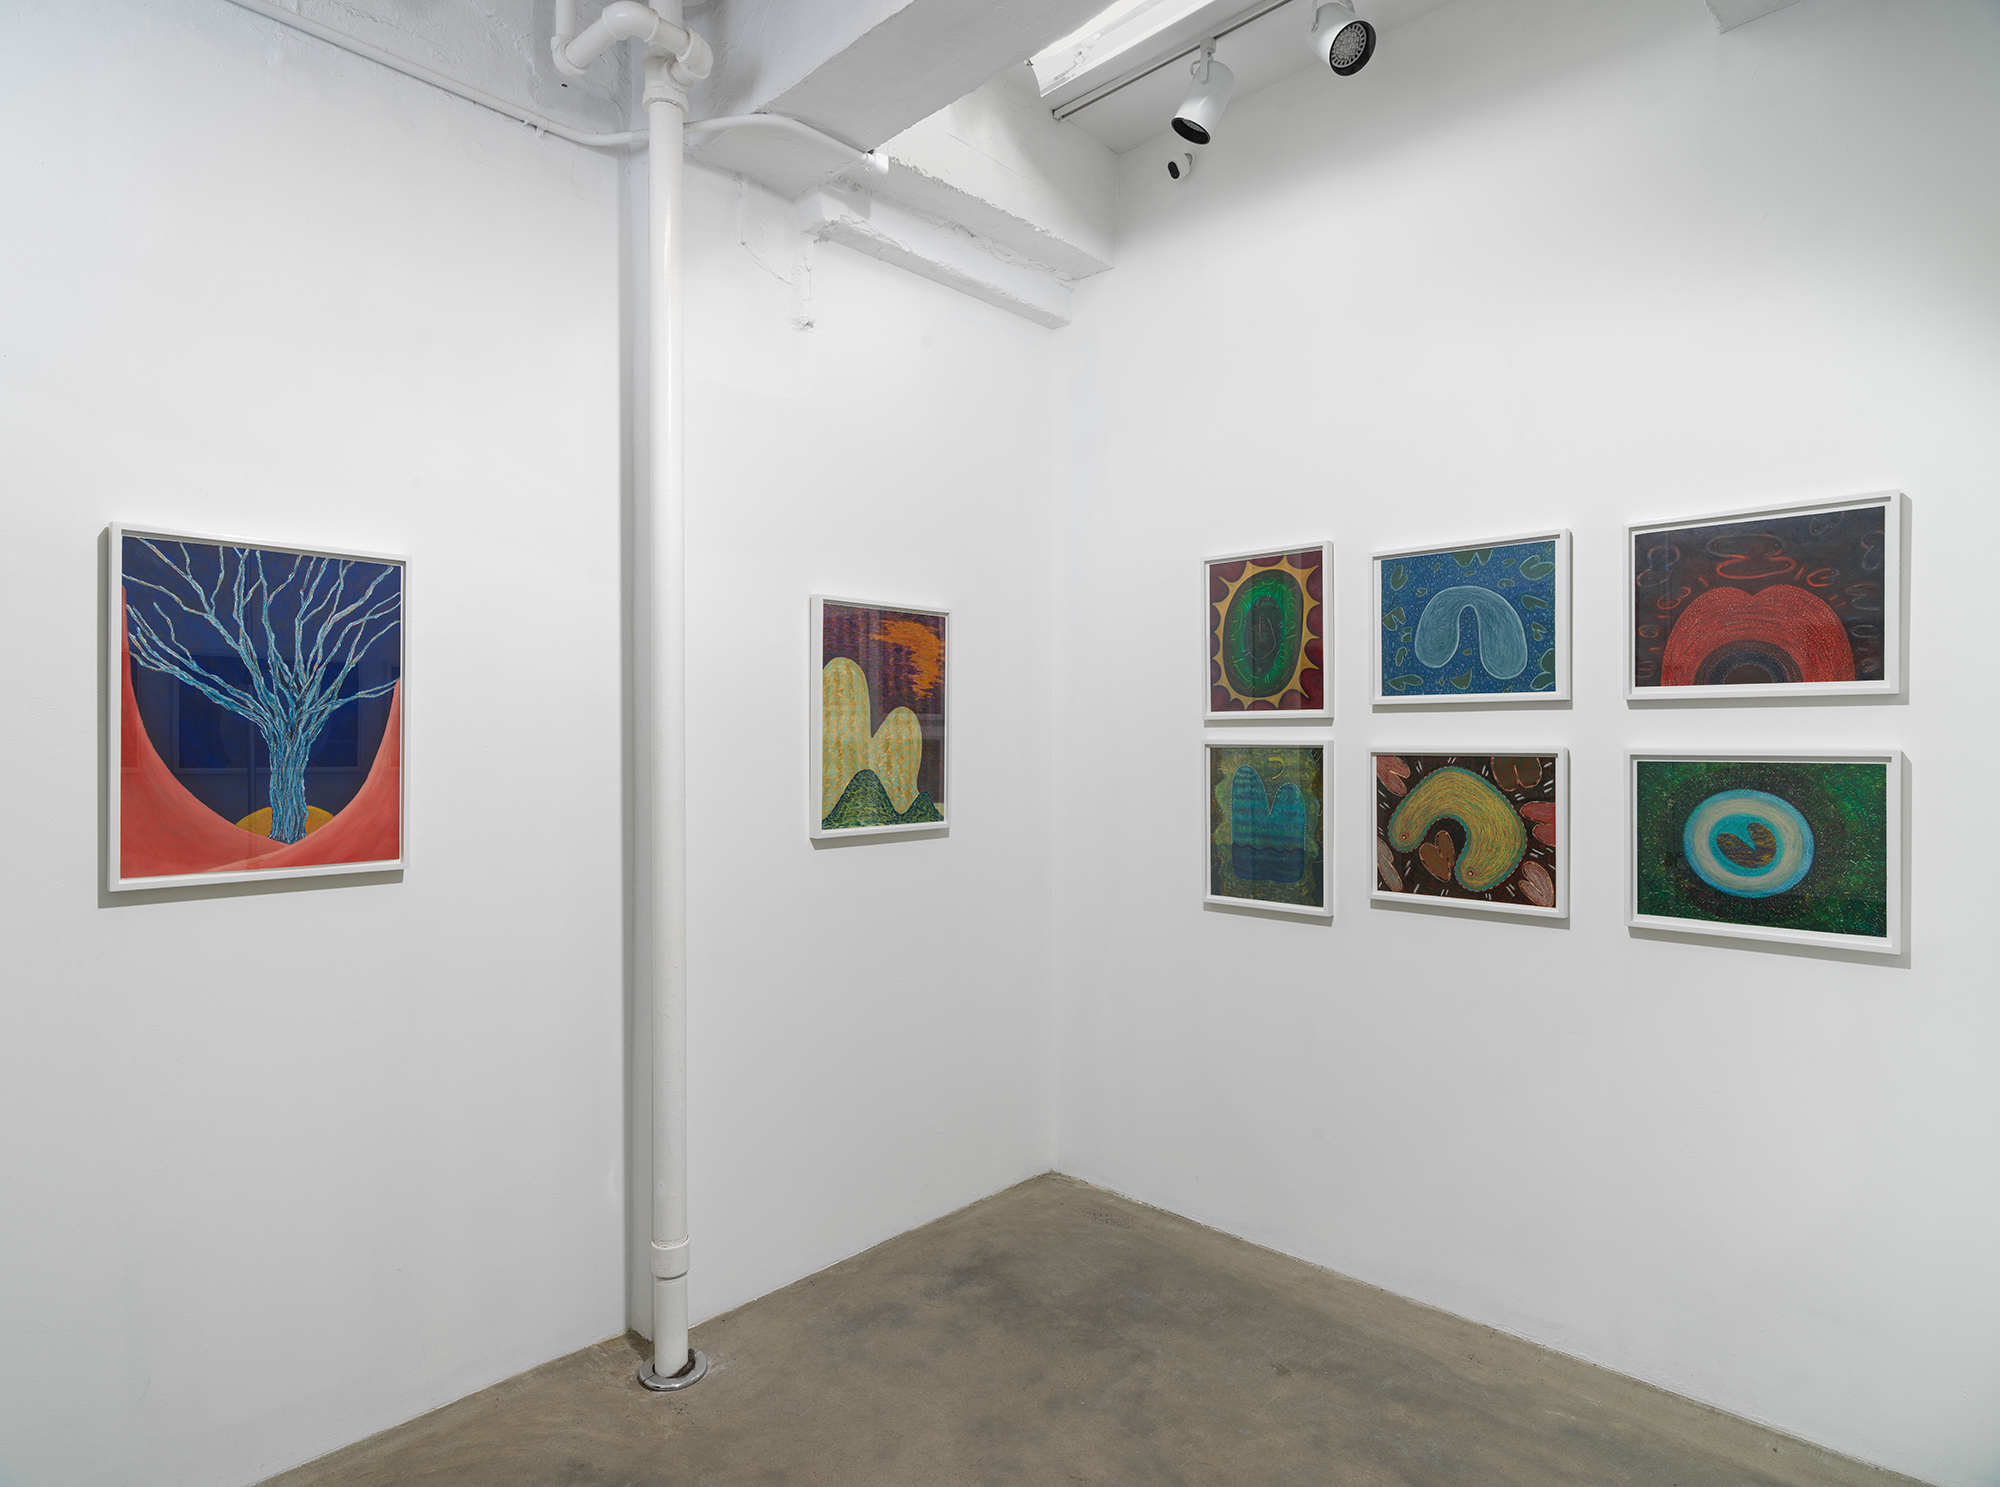 Installation view of works on paper by Ping Zheng showing grid of small works and row of larger works